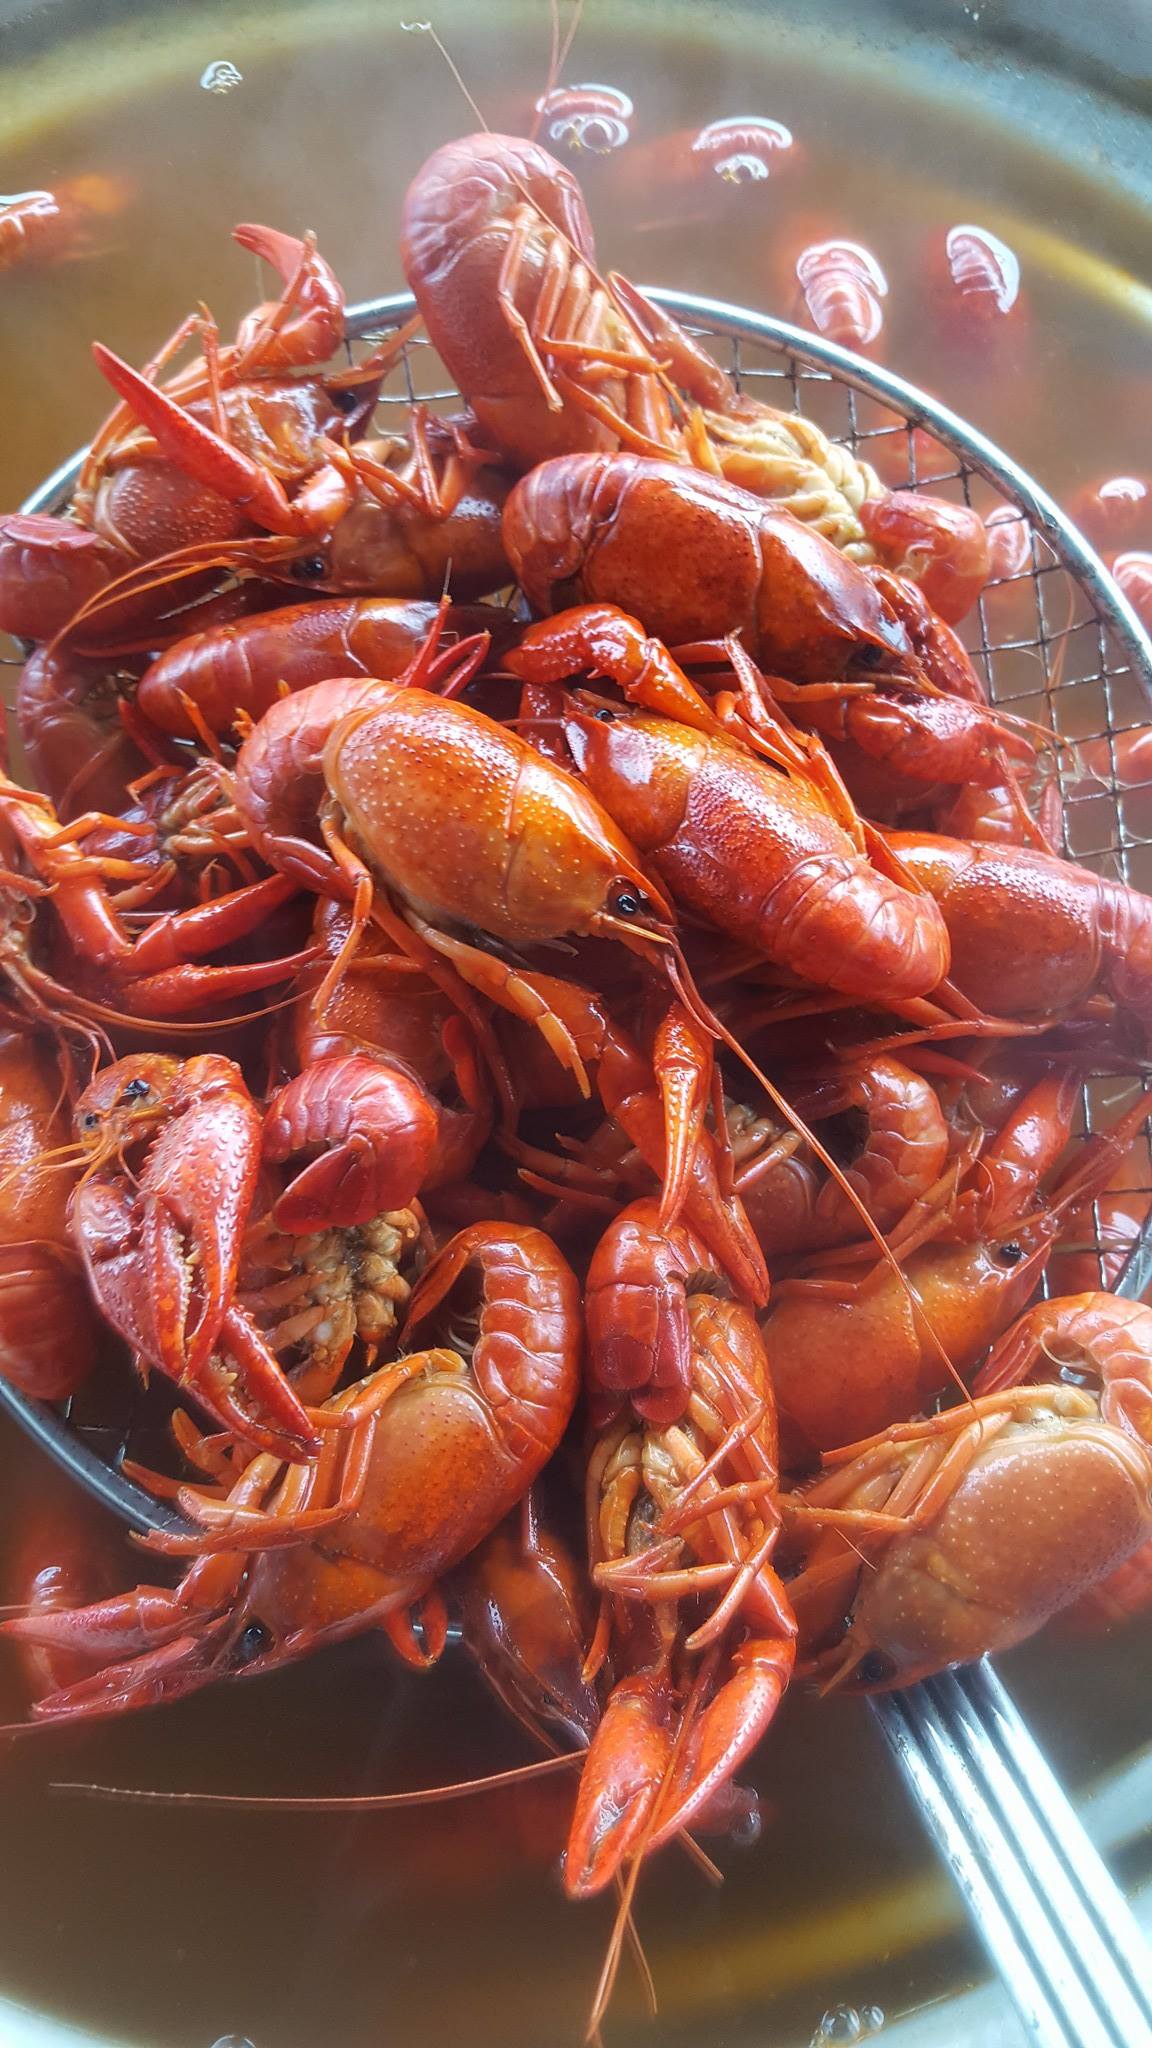 Astros Crawfish Boil: March 23, 2018 - The Crawfish Boxes